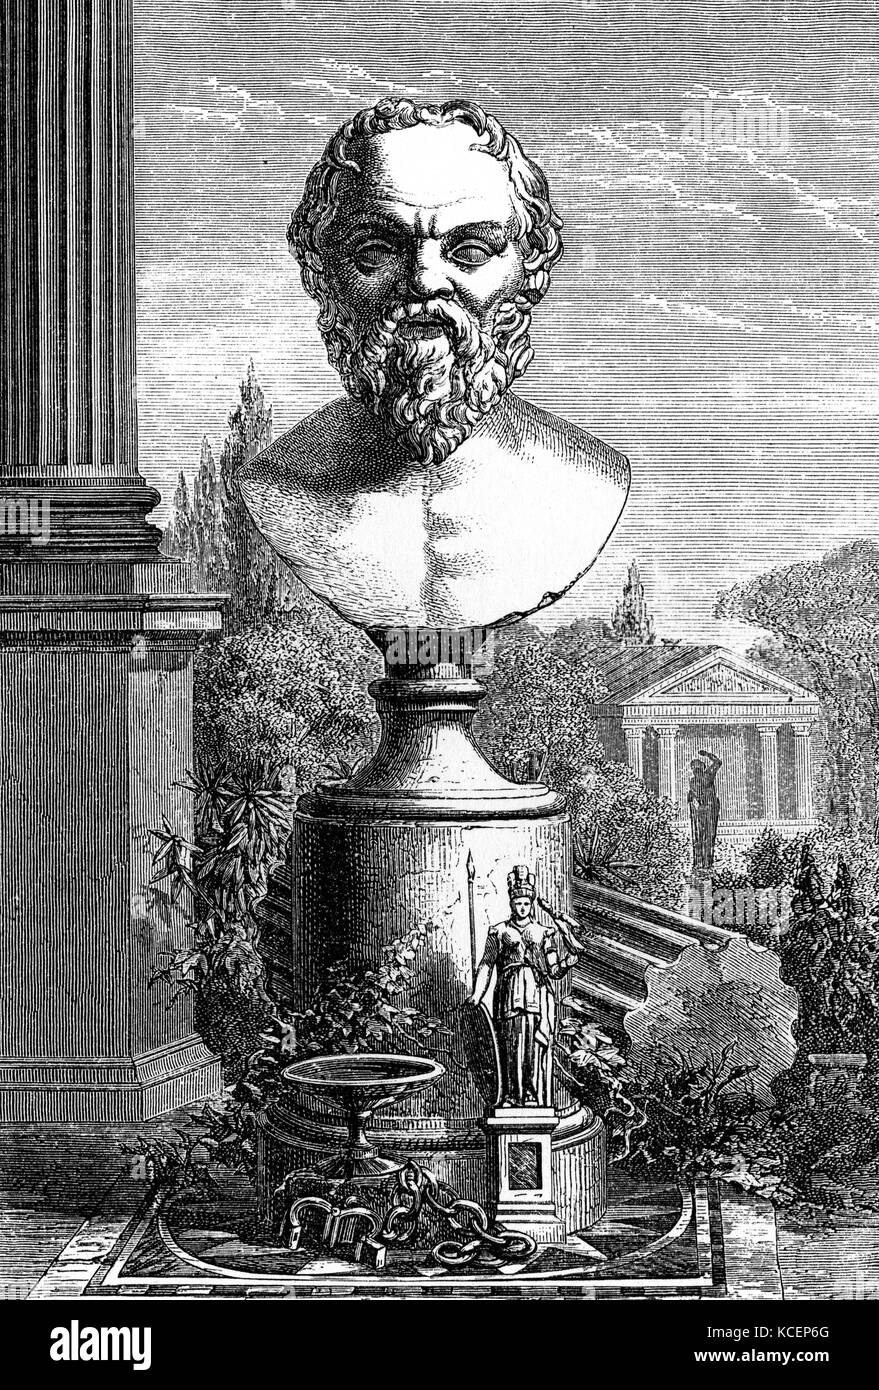 Illustration depicting a bust of Socrates. Socrates was a classical Greek philosopher and educator. Dated 18th Century Stock Photo